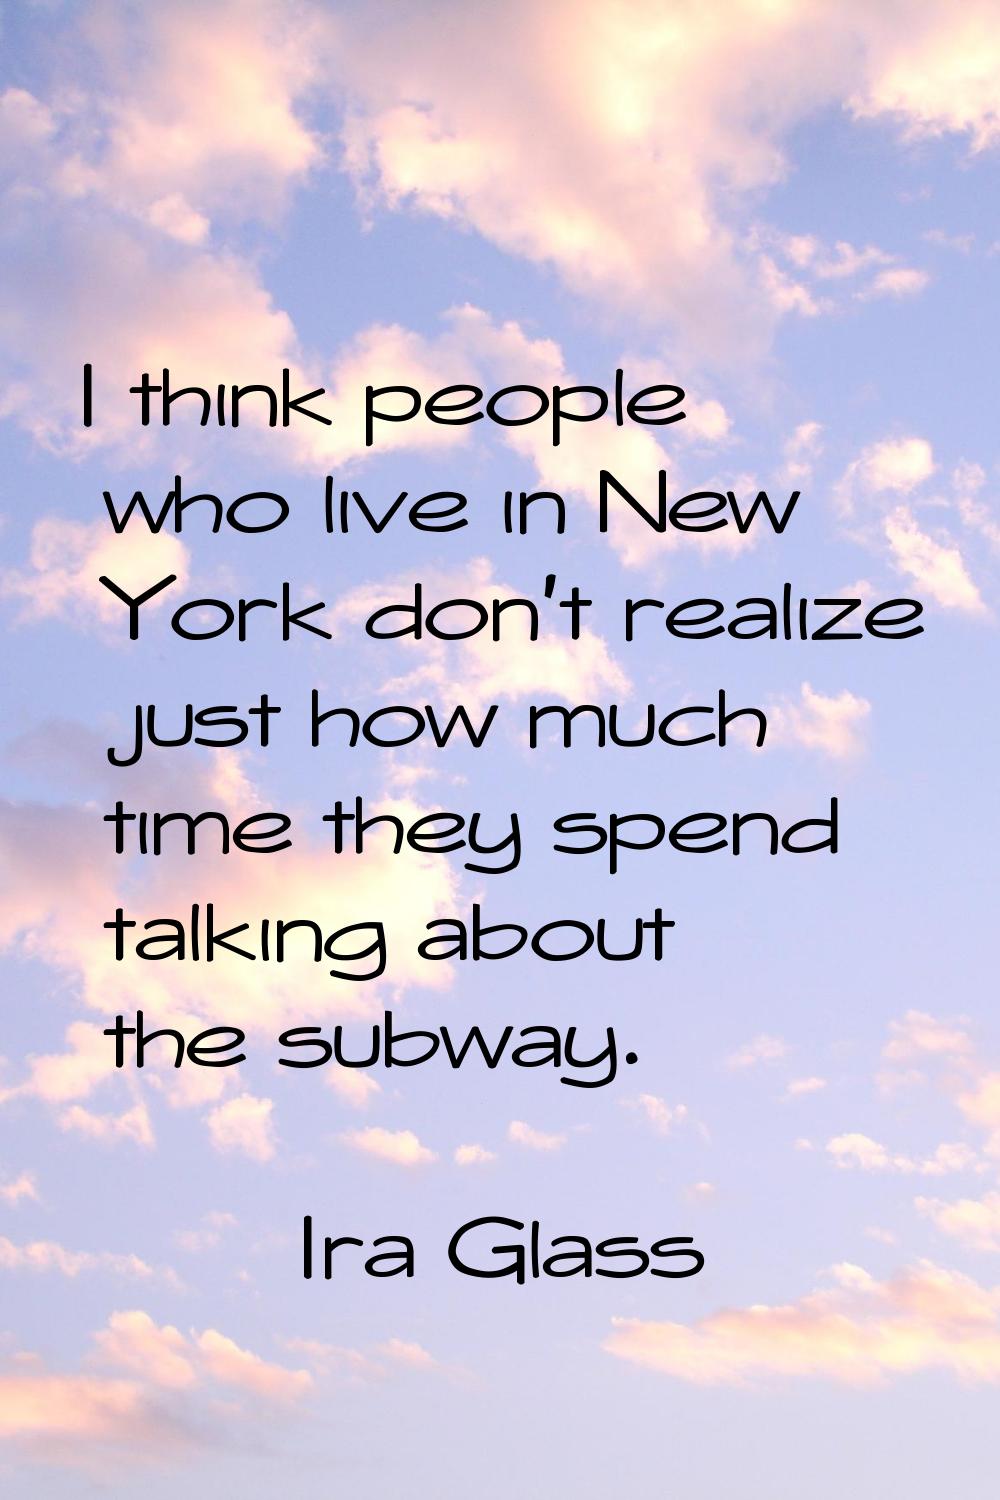 I think people who live in New York don't realize just how much time they spend talking about the s